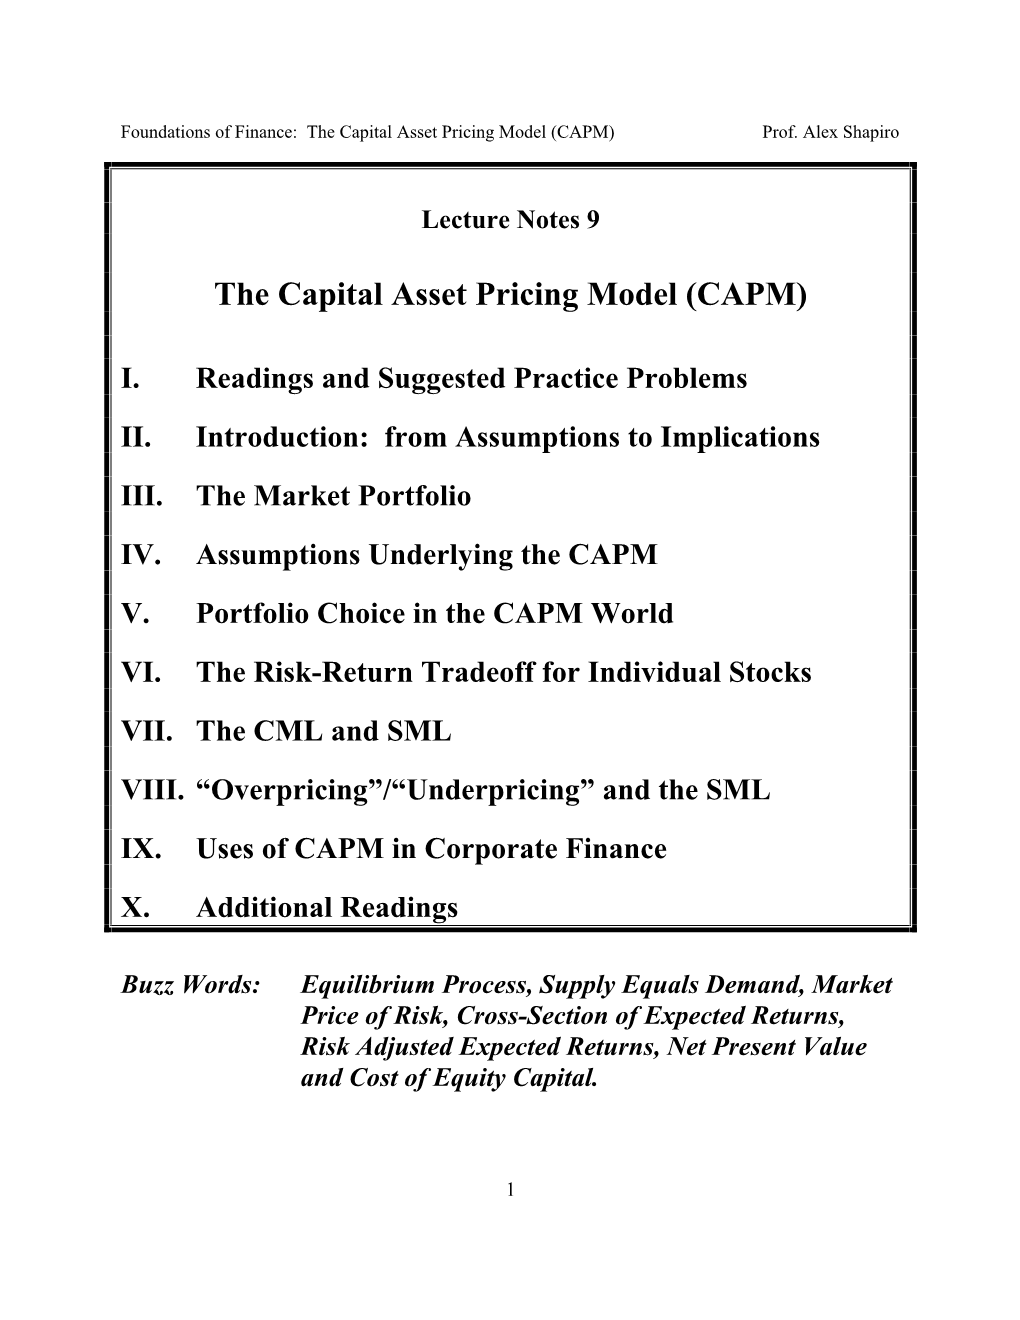 The Capital Asset Pricing Model (CAPM) Prof